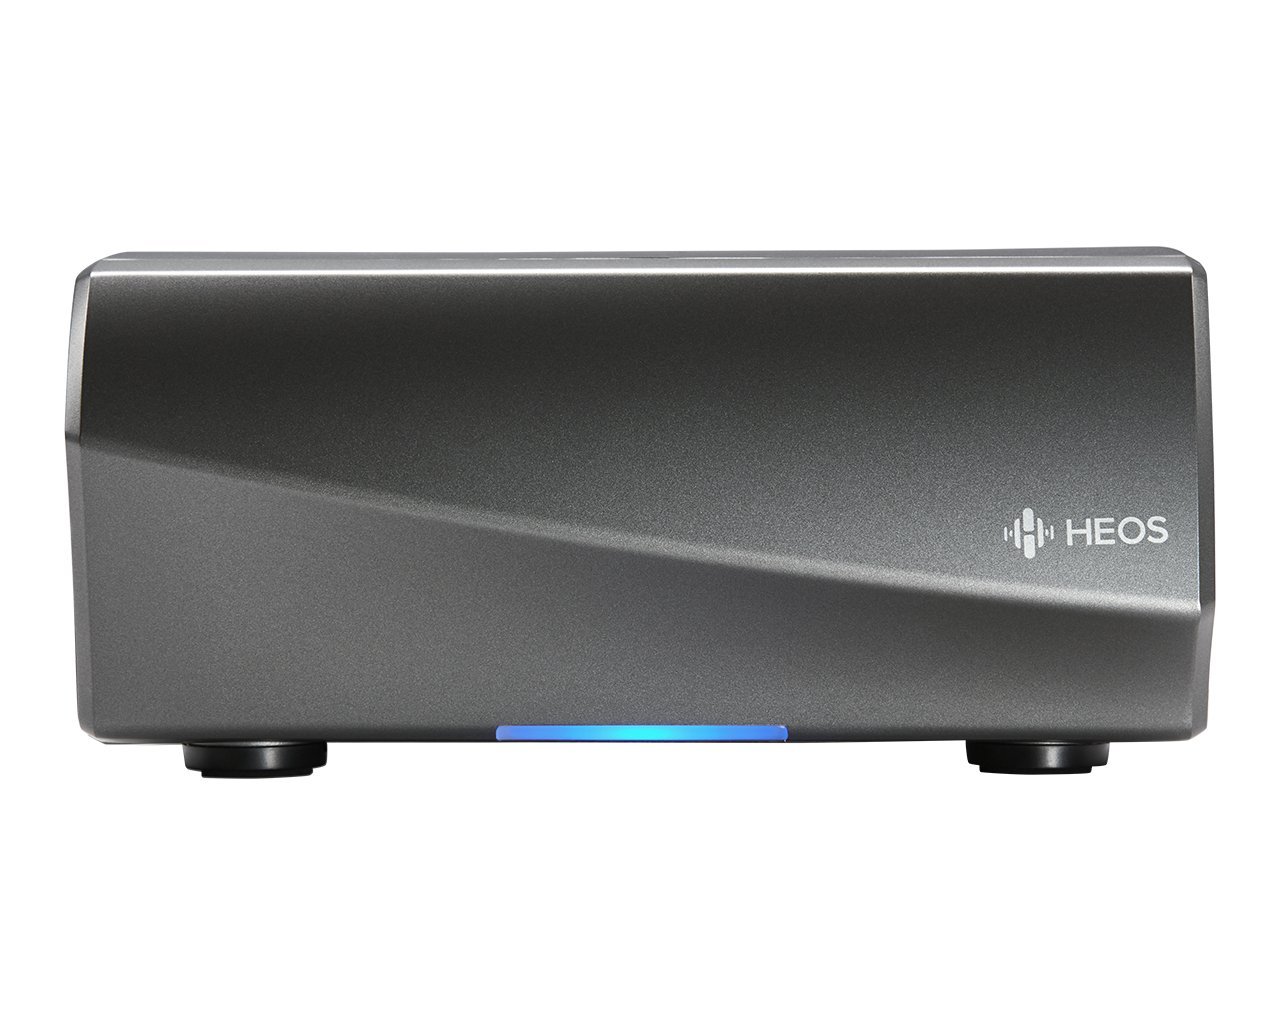 Denon HEOS Link Wireless Pre-Amplifier For Multi-Room Audio - Series 2 (New Version), Amazon Alexa Compatibility, Powered Subwoofer Connection, Black with Silver, 2.91 x 6.14 x 5.83